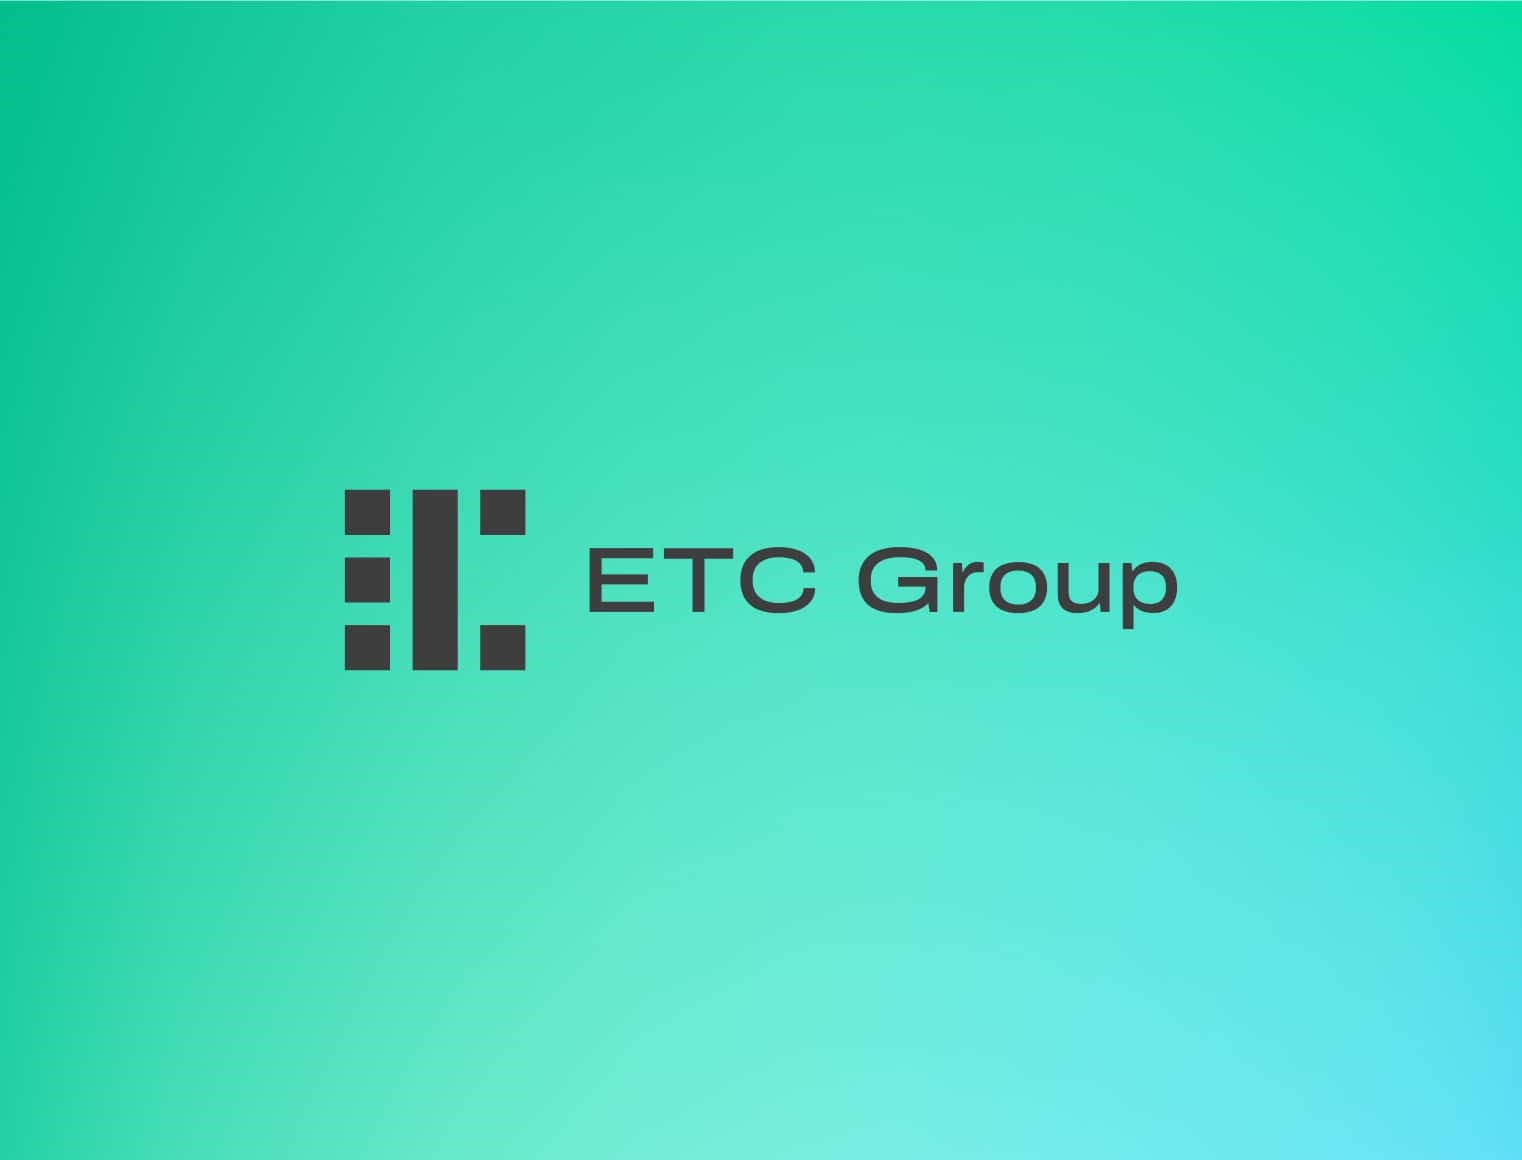 ETC Group Crypto Market Compass #8 2024 Last week, cryptoassets outperformed traditional assets by a very wide margin as Bitcoin reclaimed 50k USD in price and 1 trn USD in market cap again